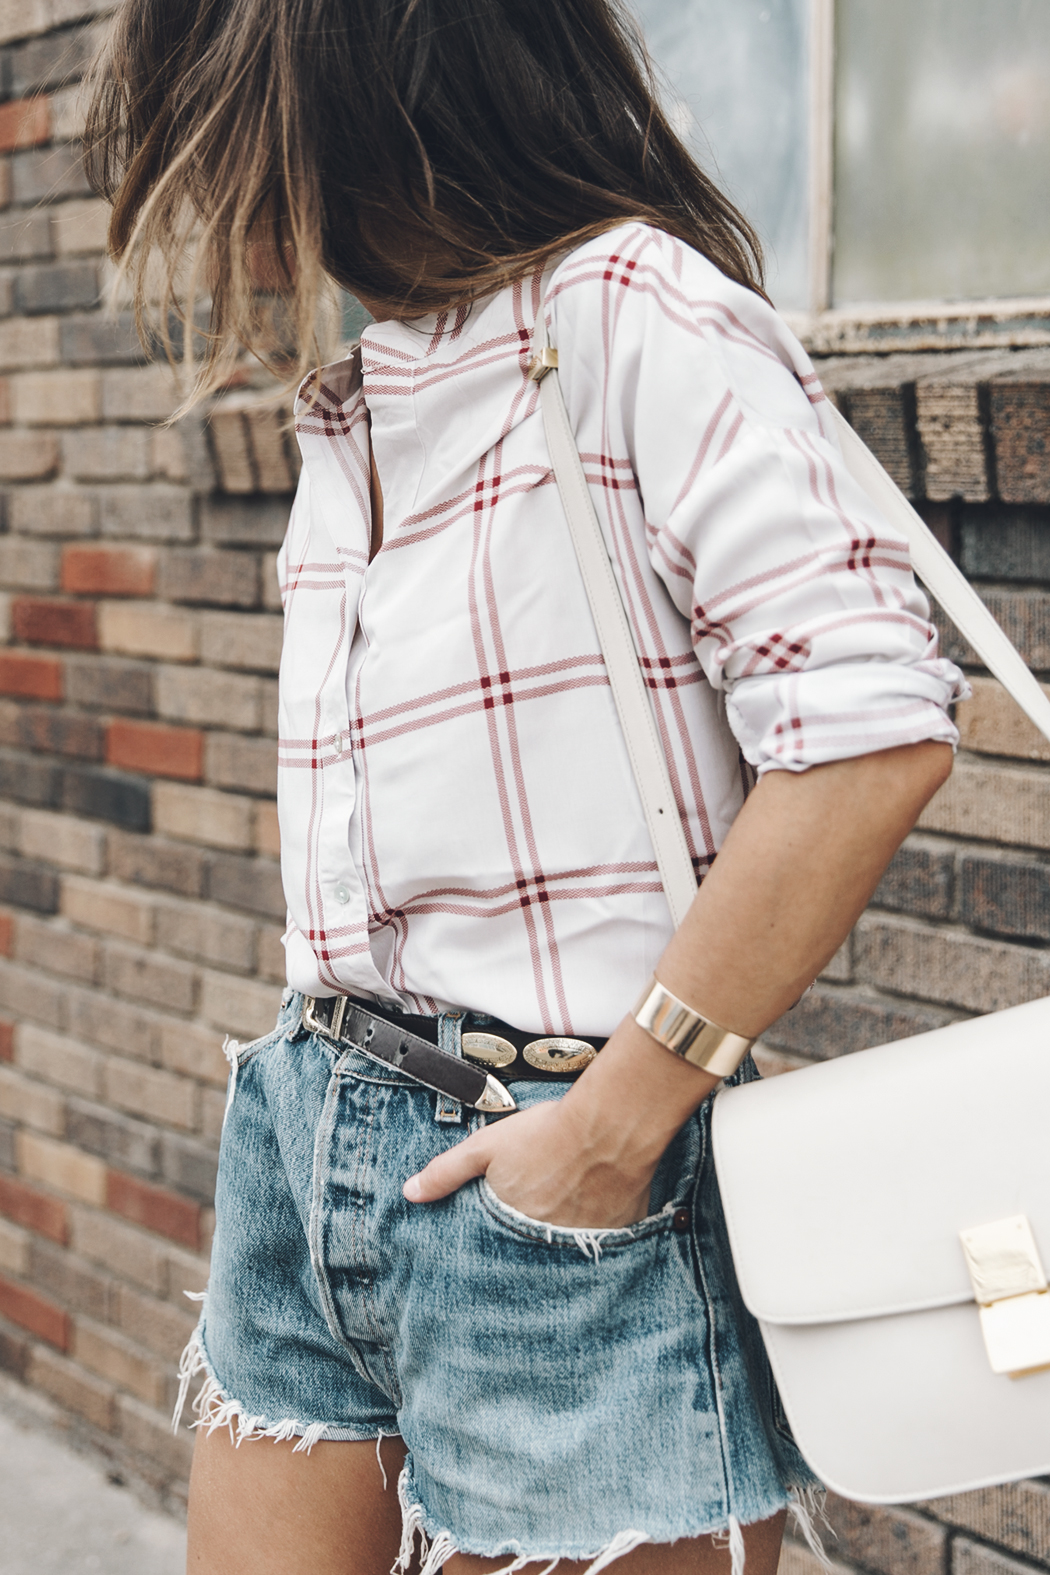 Goodnight_Macaroon-Levis_VIntage-Checked_Blouse-Pink_Shirt-Red_Heels-Marni_Sandals-Dallas-23